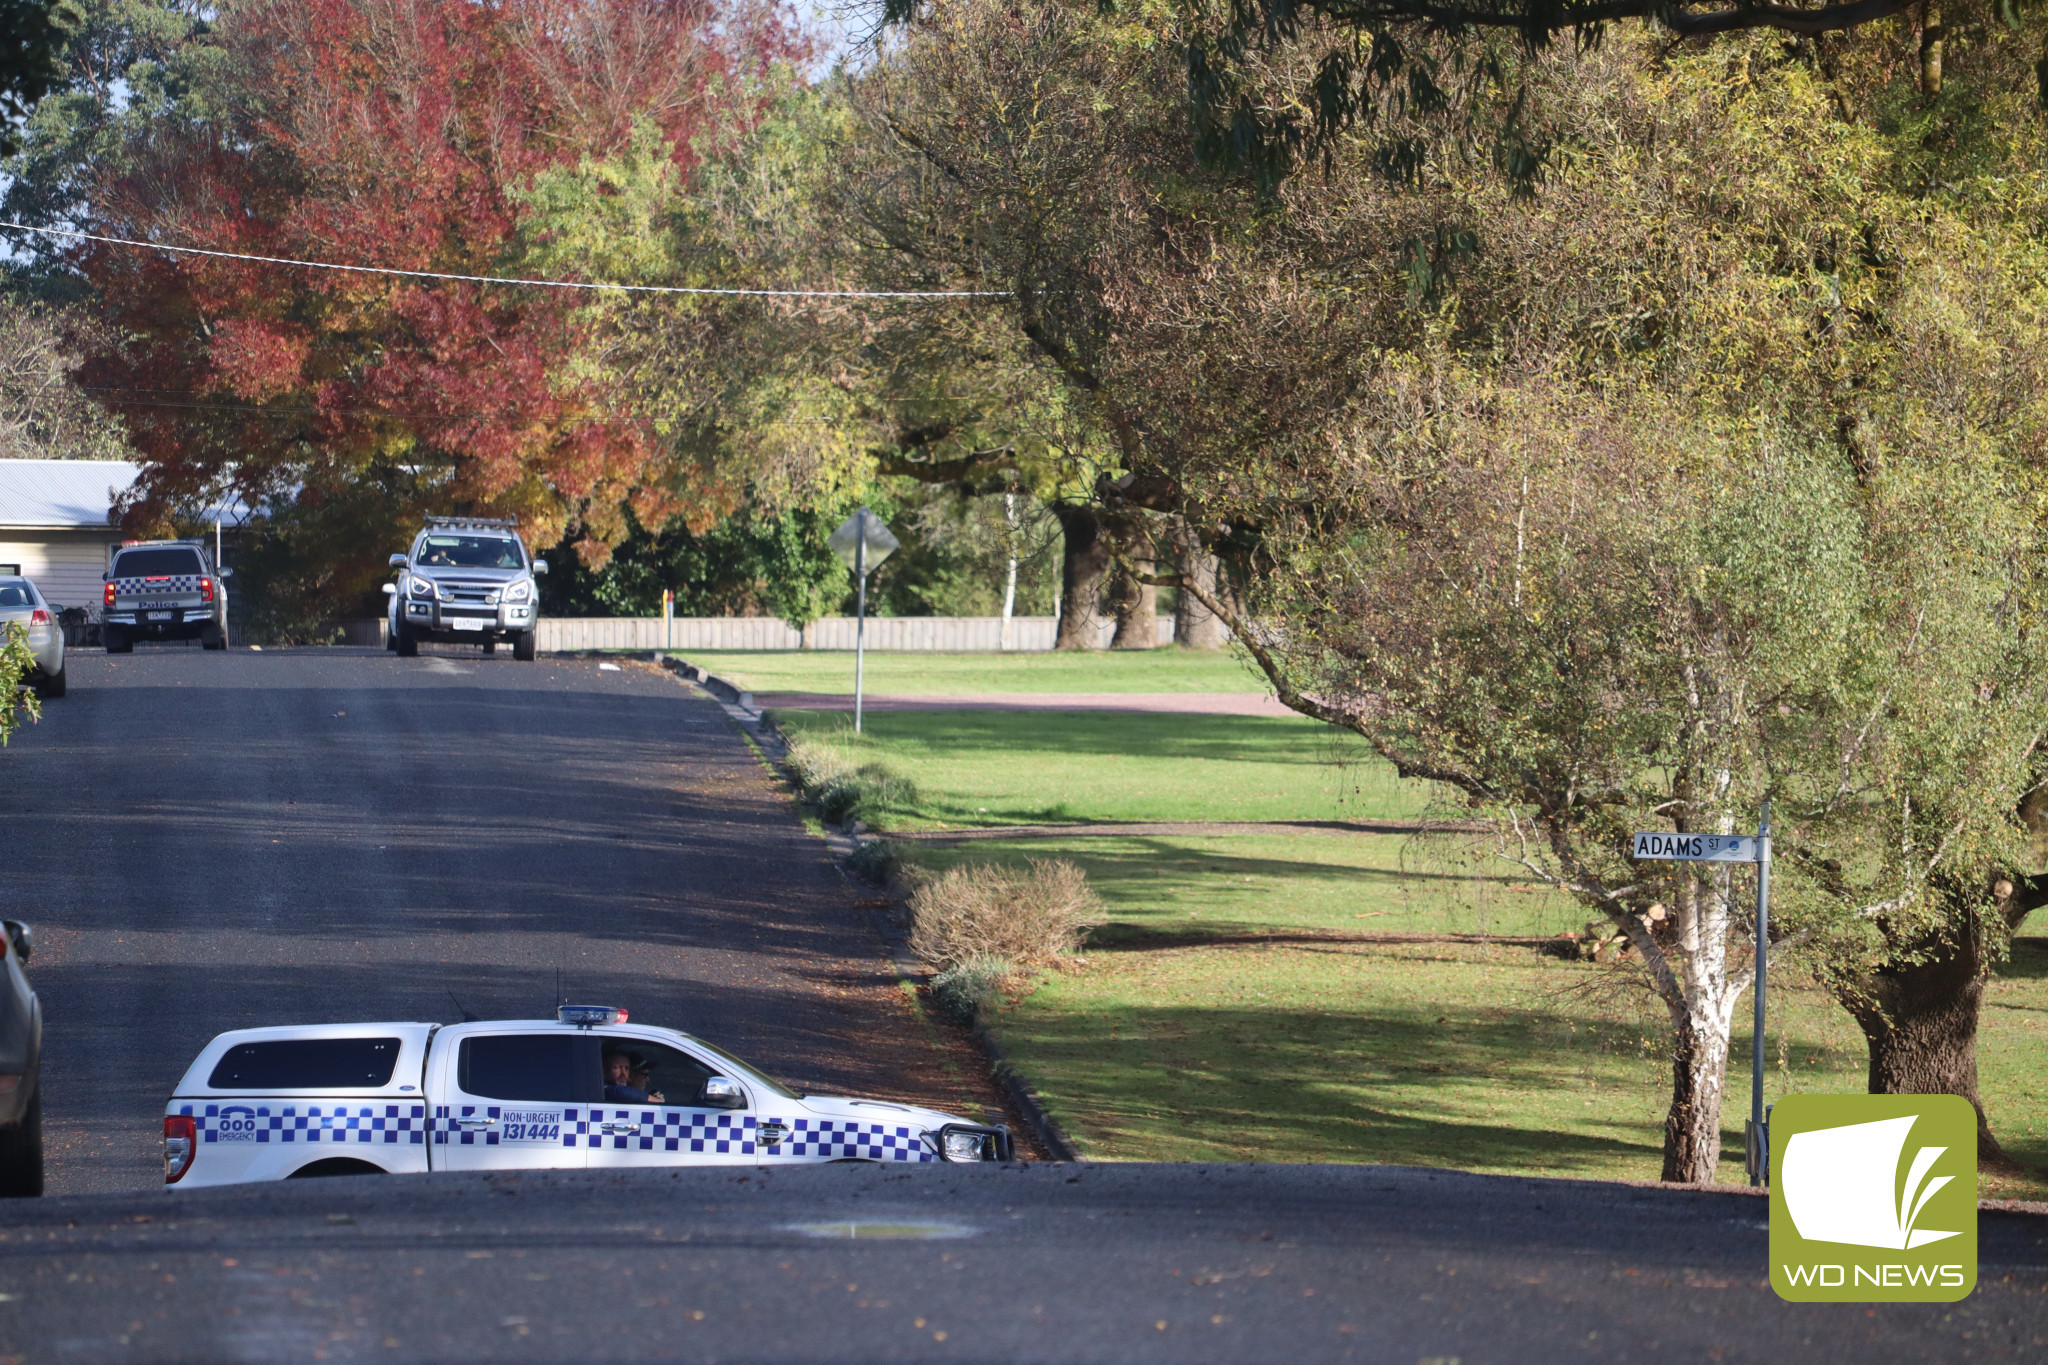 Police attended the Lake Cobden area today following reports of an alleged shooting in the early hours of the morning.